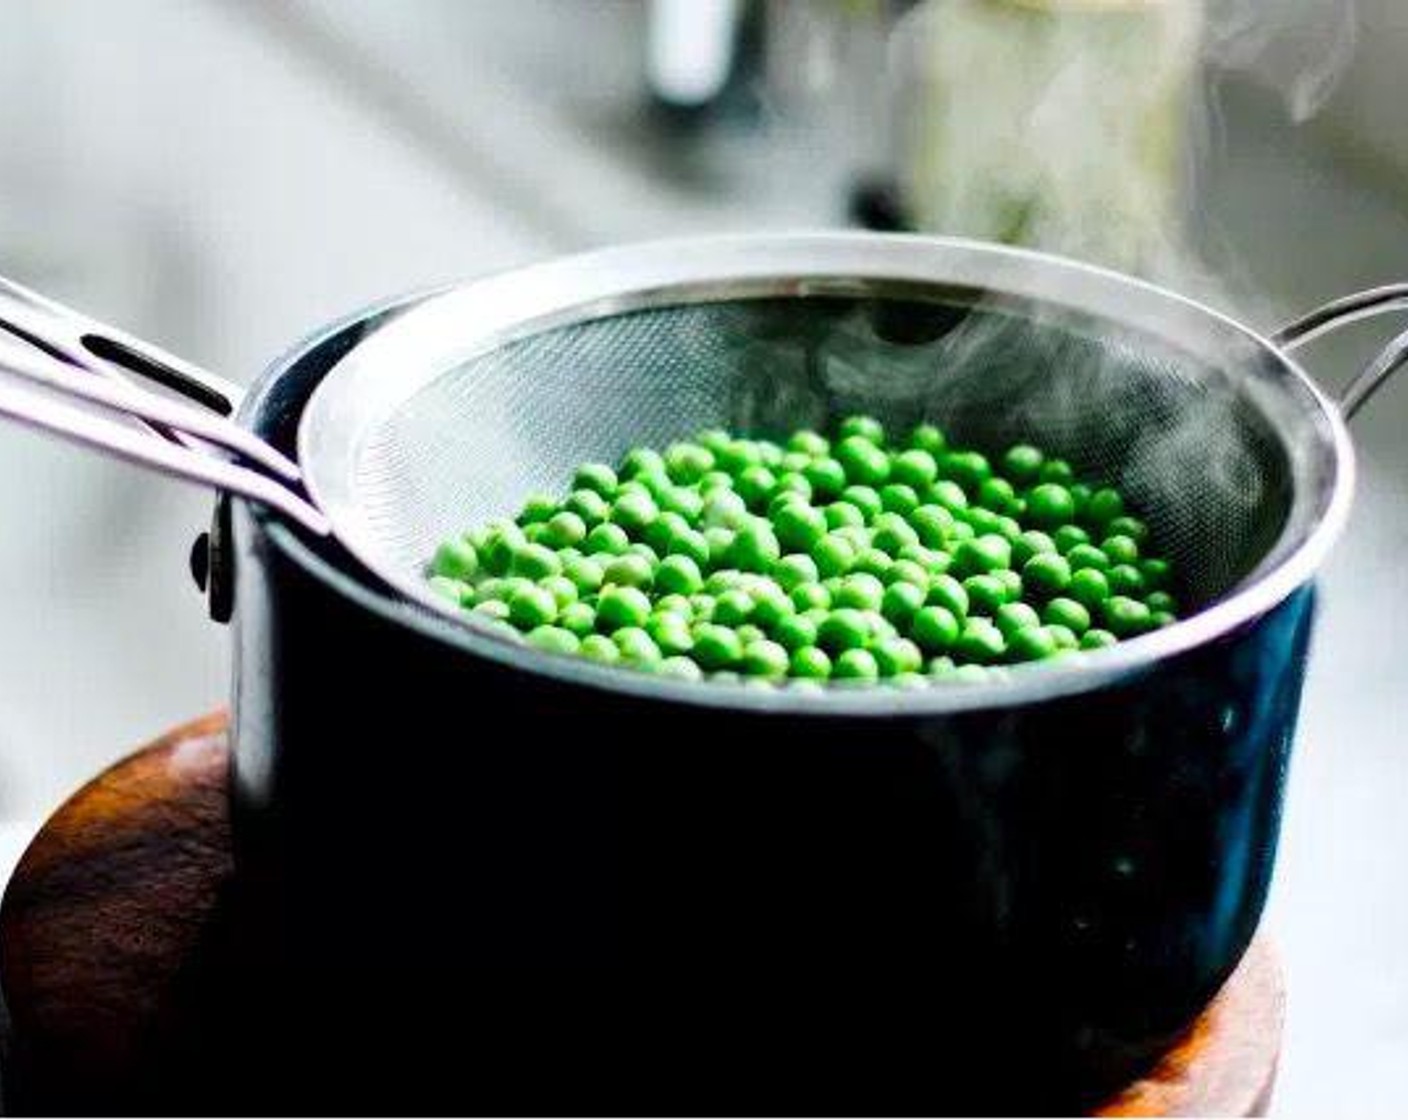 step 4 Blanch Green Peas (2 cups) in 1 quart boiling salted water with 1 tablespoon salt for 2 minutes. They should float. Strain and immediately immerse in cold water to stop them from over cooking and loosing their color. Set aside.